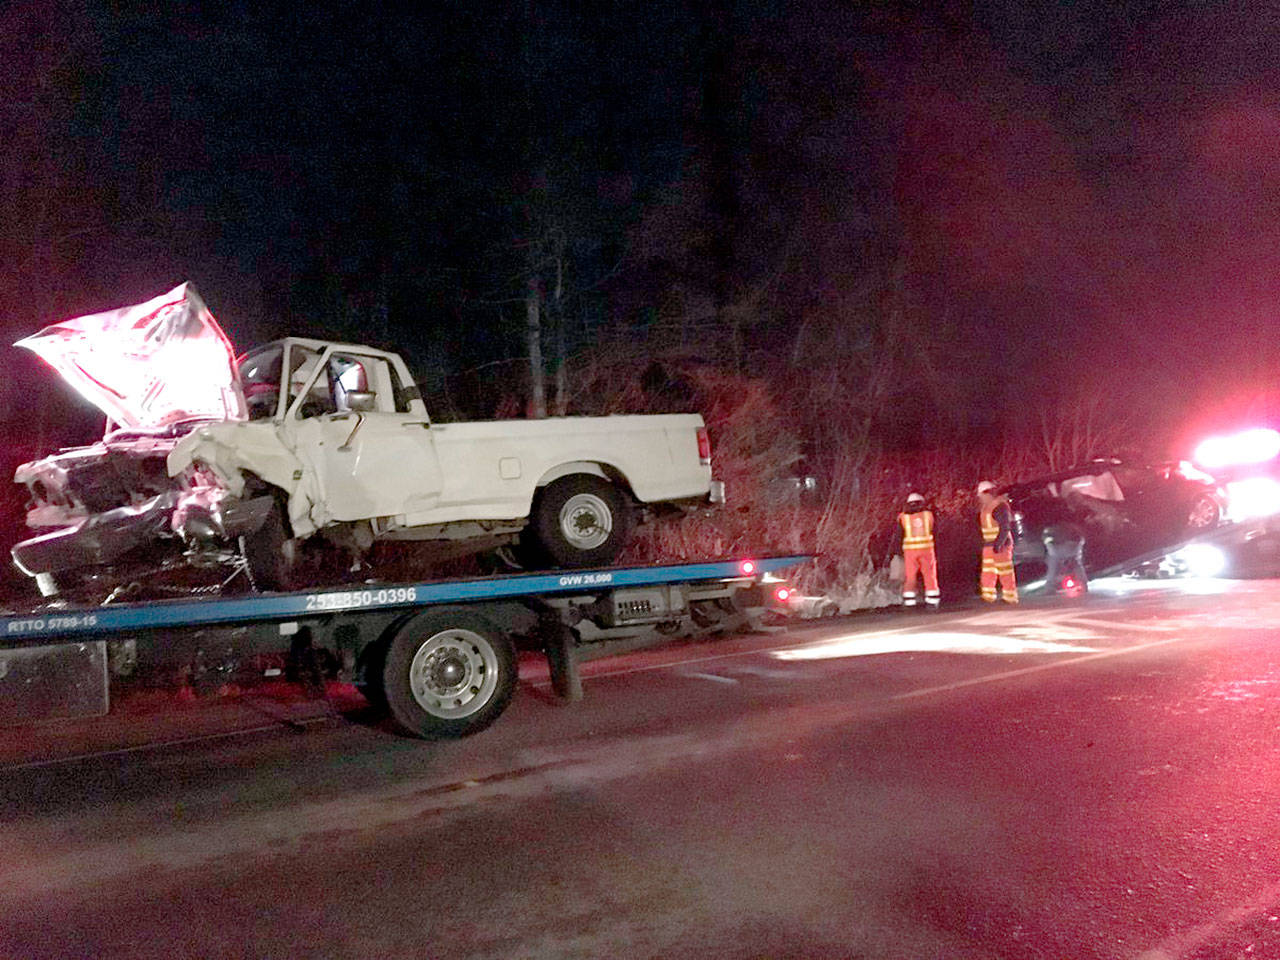 One man was killed and two people were injured in a head-on crash that shut down part of state Highway 410 just east of Bonney Lake last Wednesday night. (KOMO News)